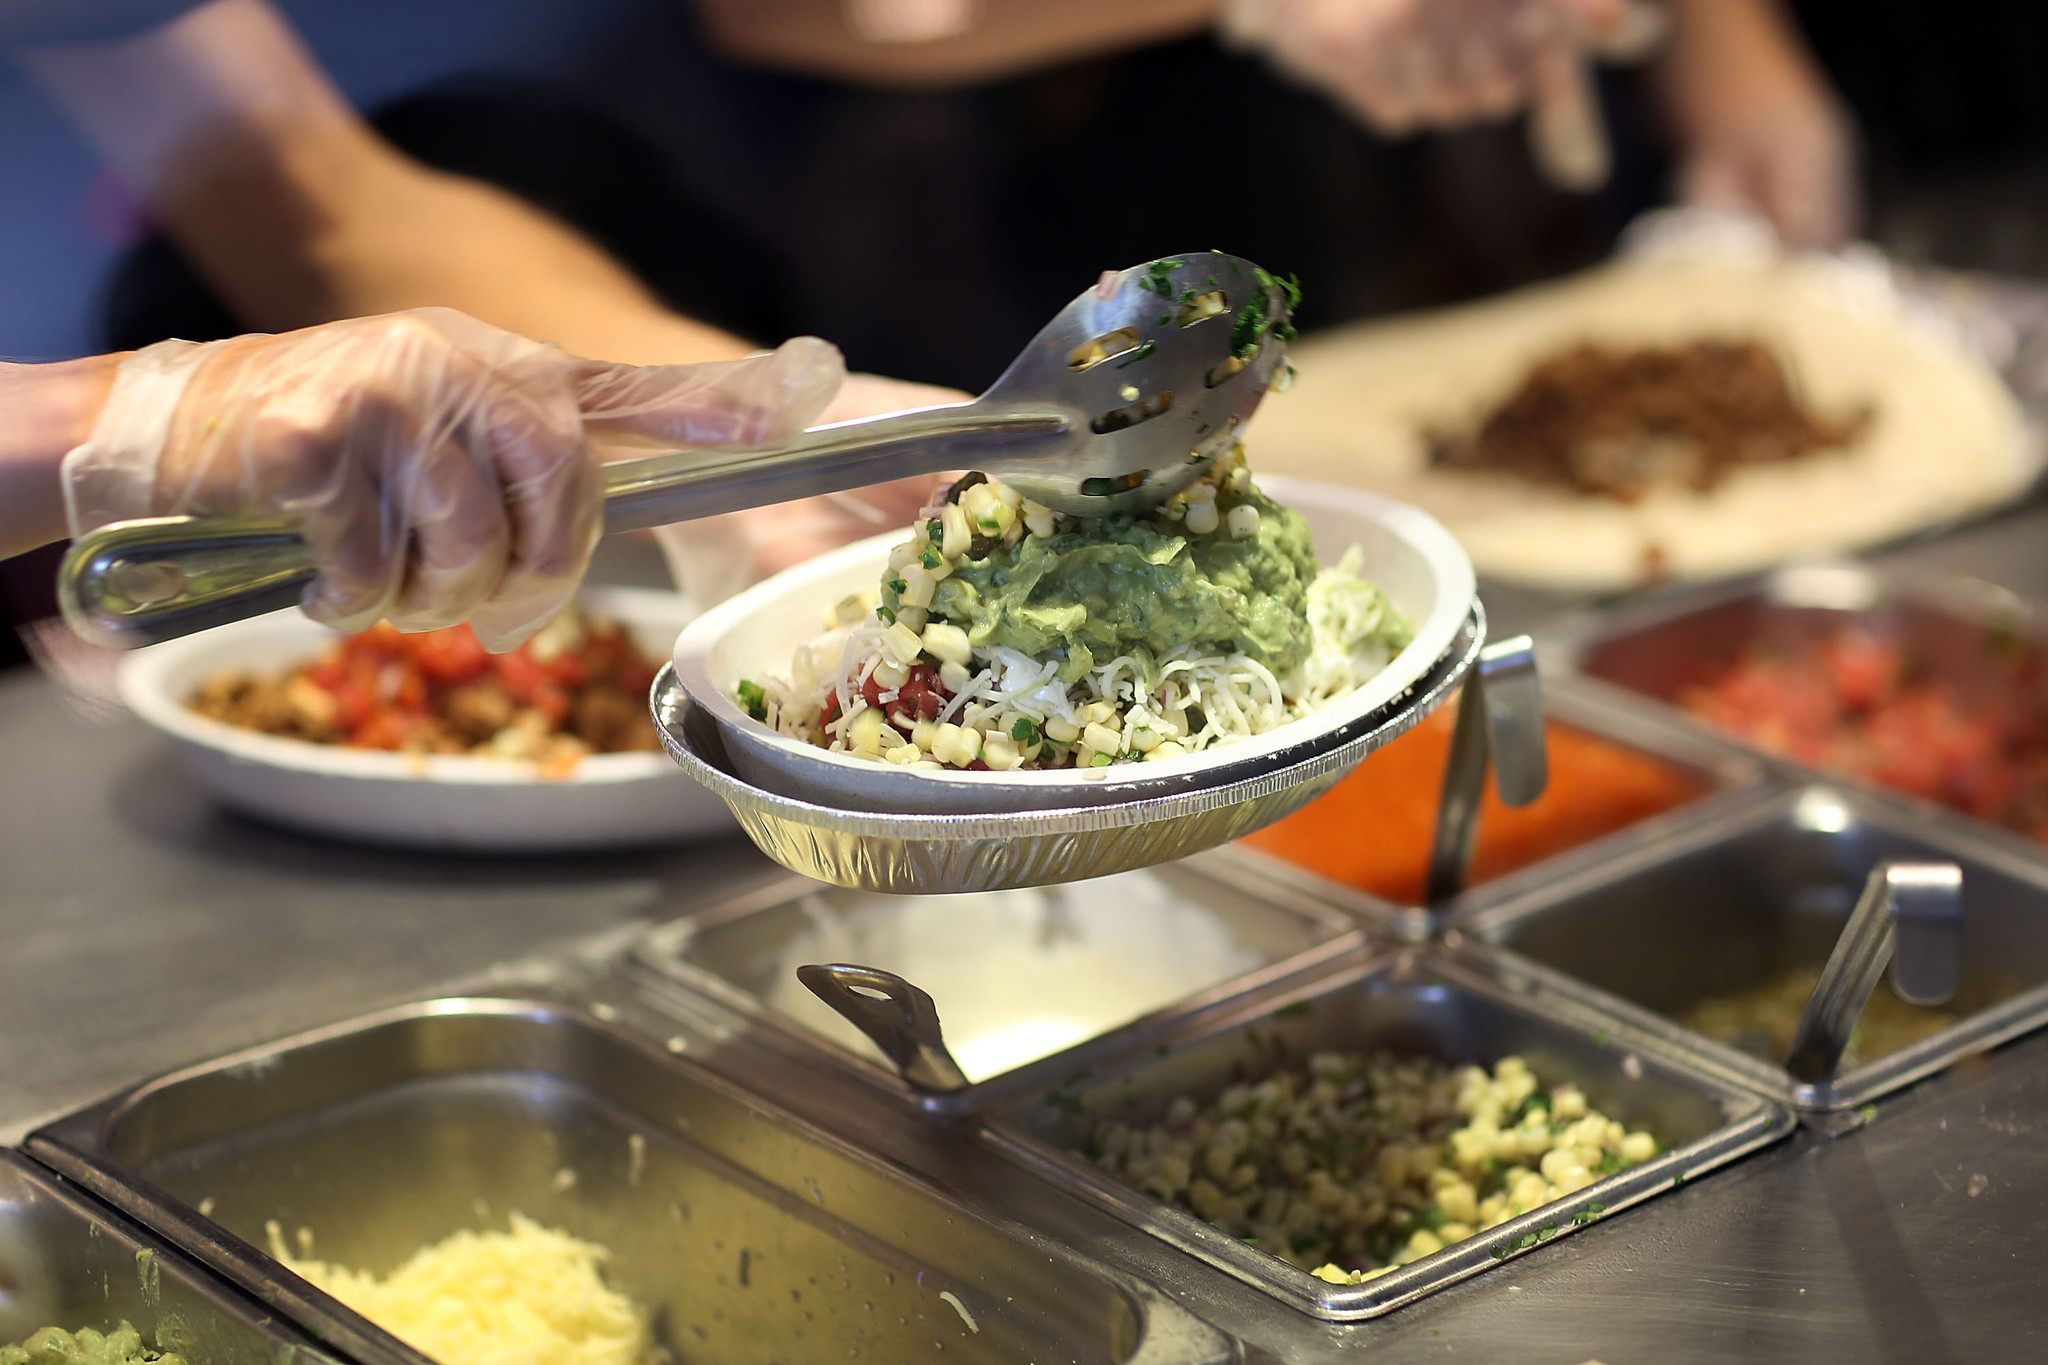 Chipotle's junk science on GMOs